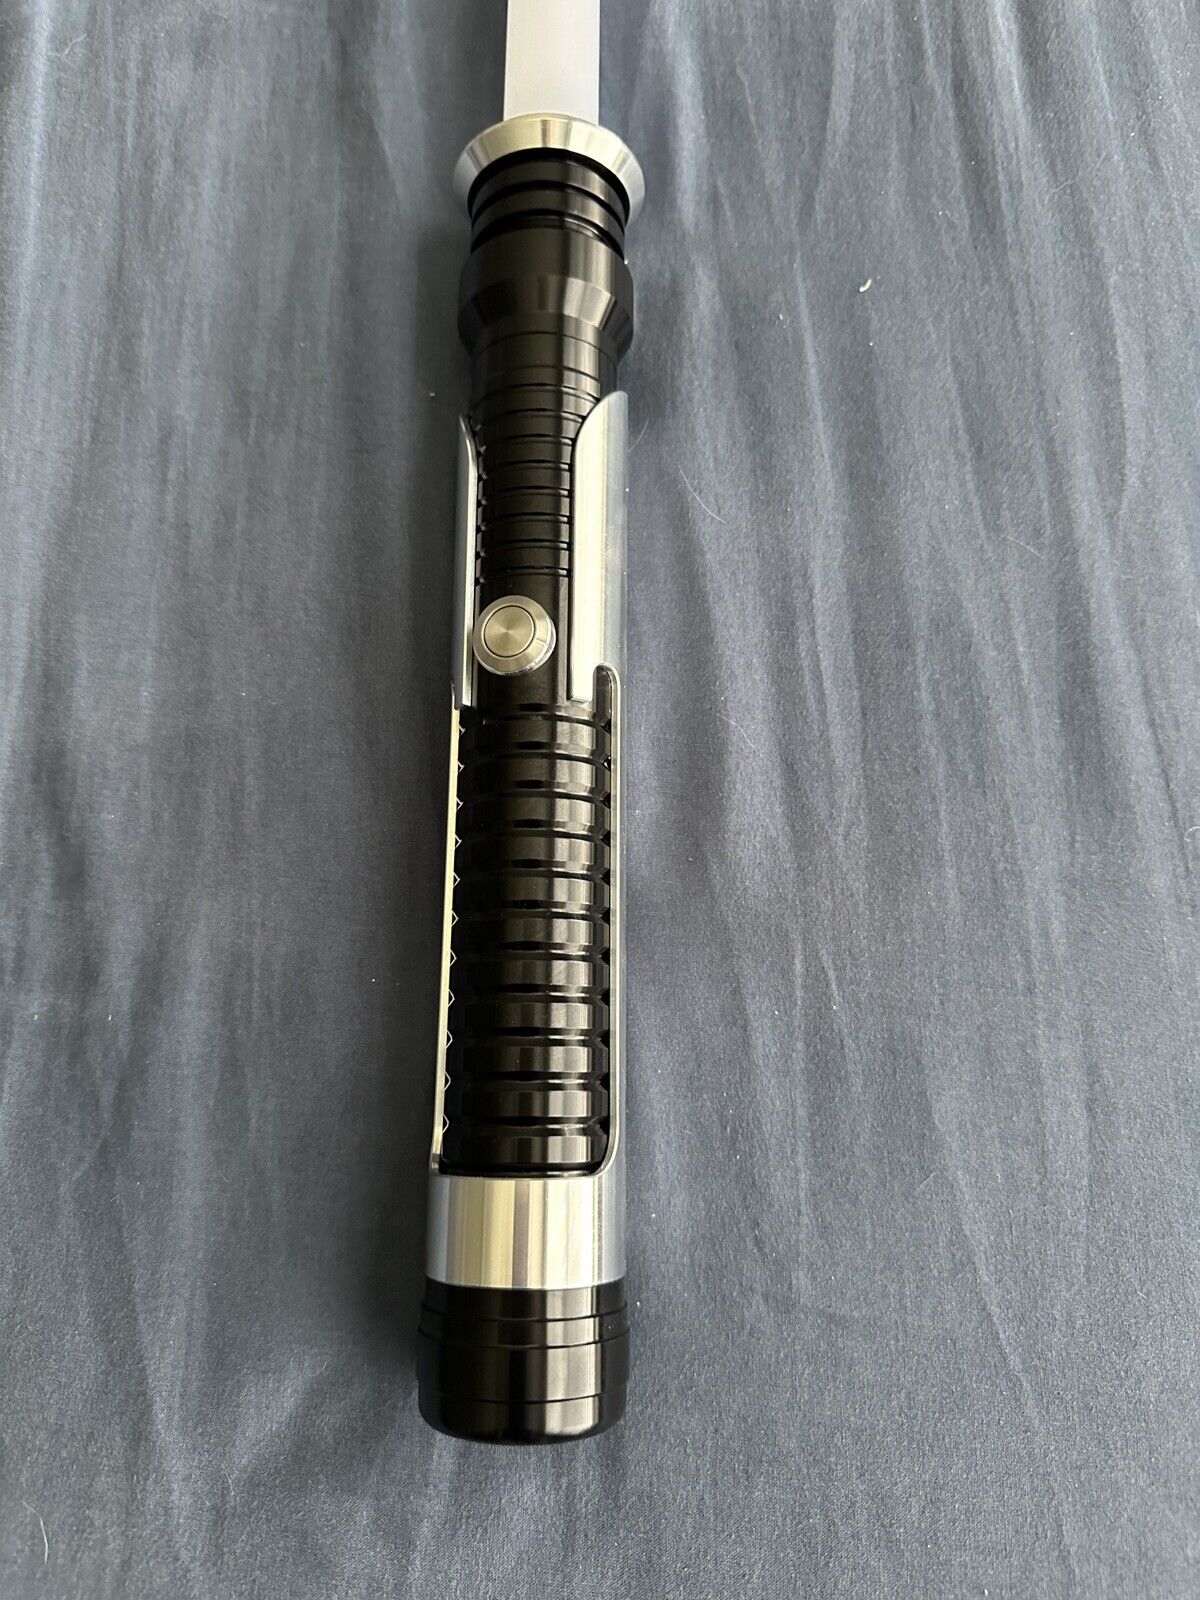 Ultrasabers The Consuler Lightsaber With New Obsidian Sound Qui-Gon Jinn Green